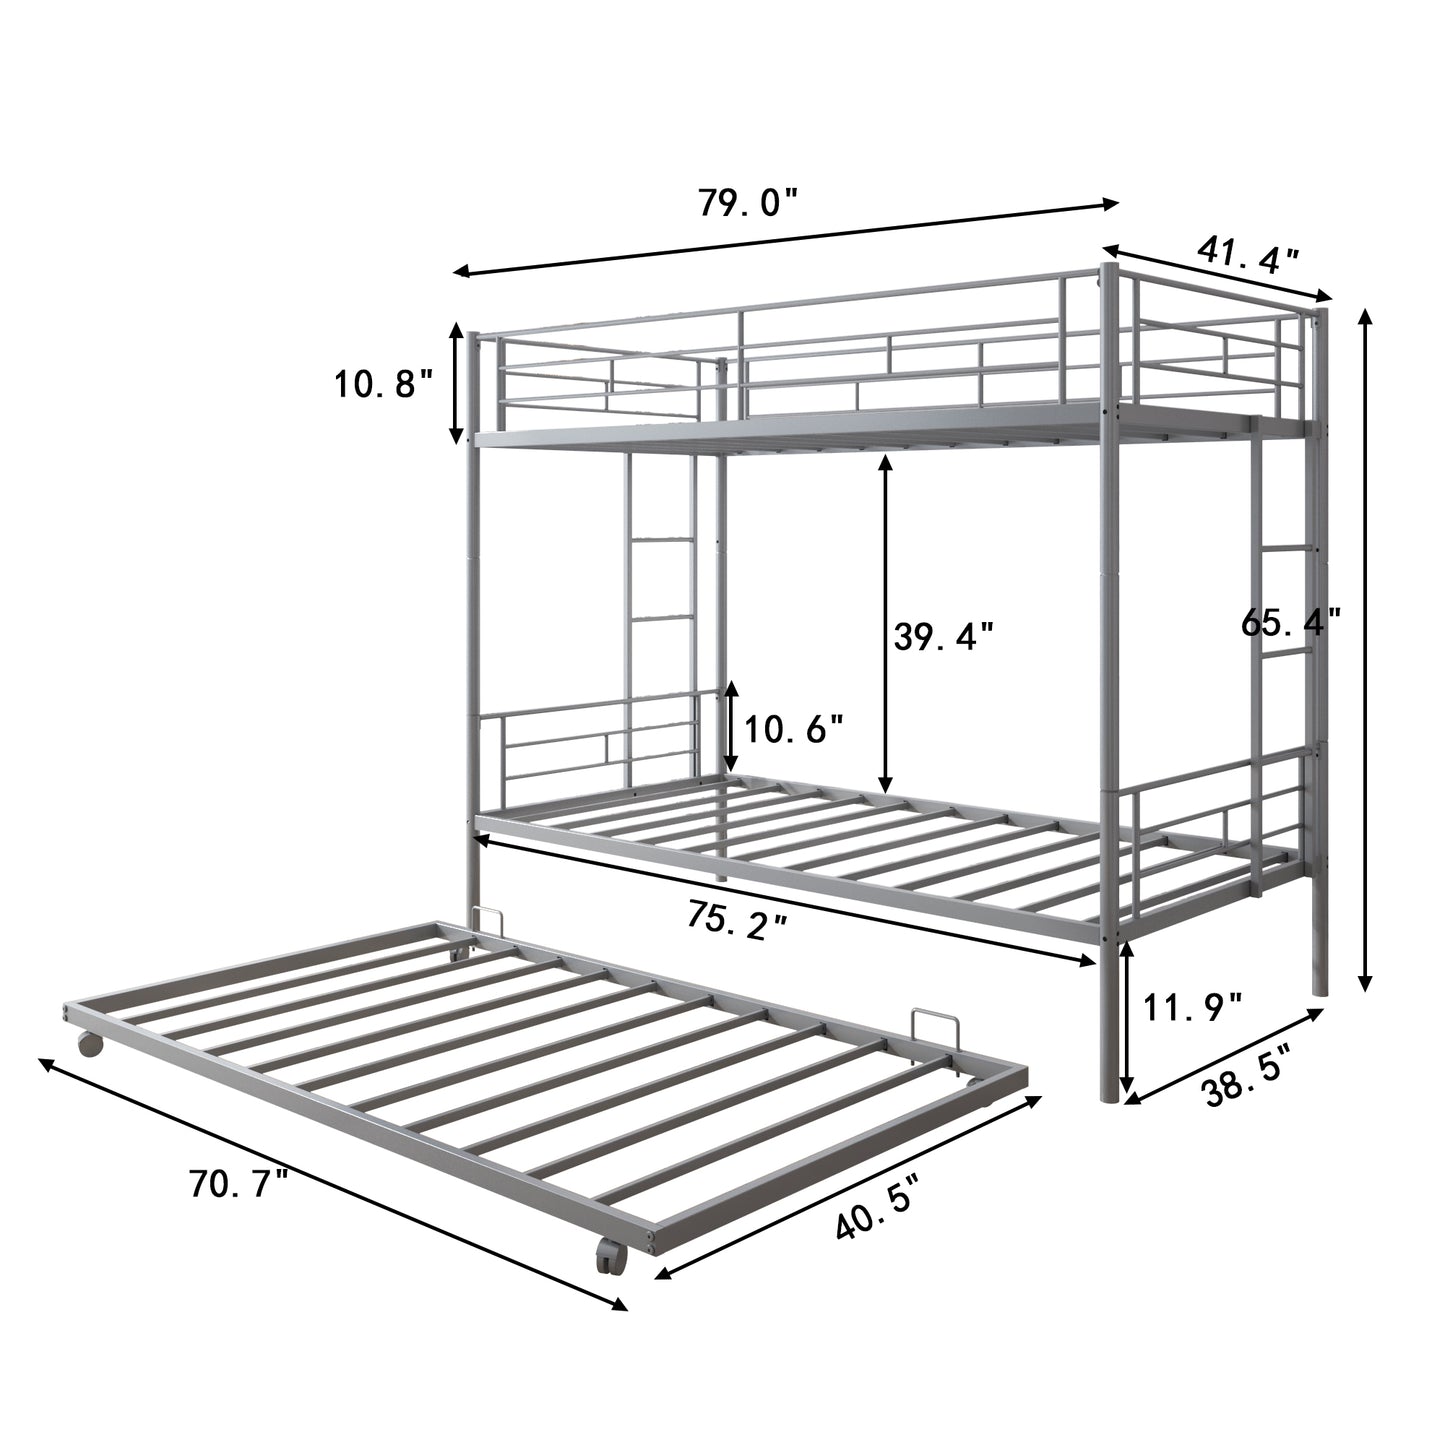 Twin Over Twin Metal Bunk Beds with Trundle, HSUNNS Convertible Bunk Beds Twin Size for Kids Adults, Bunk Bed Can Be Divided into 3 Beds, No Box Spring Needed, 350lbs Capacity, Silver